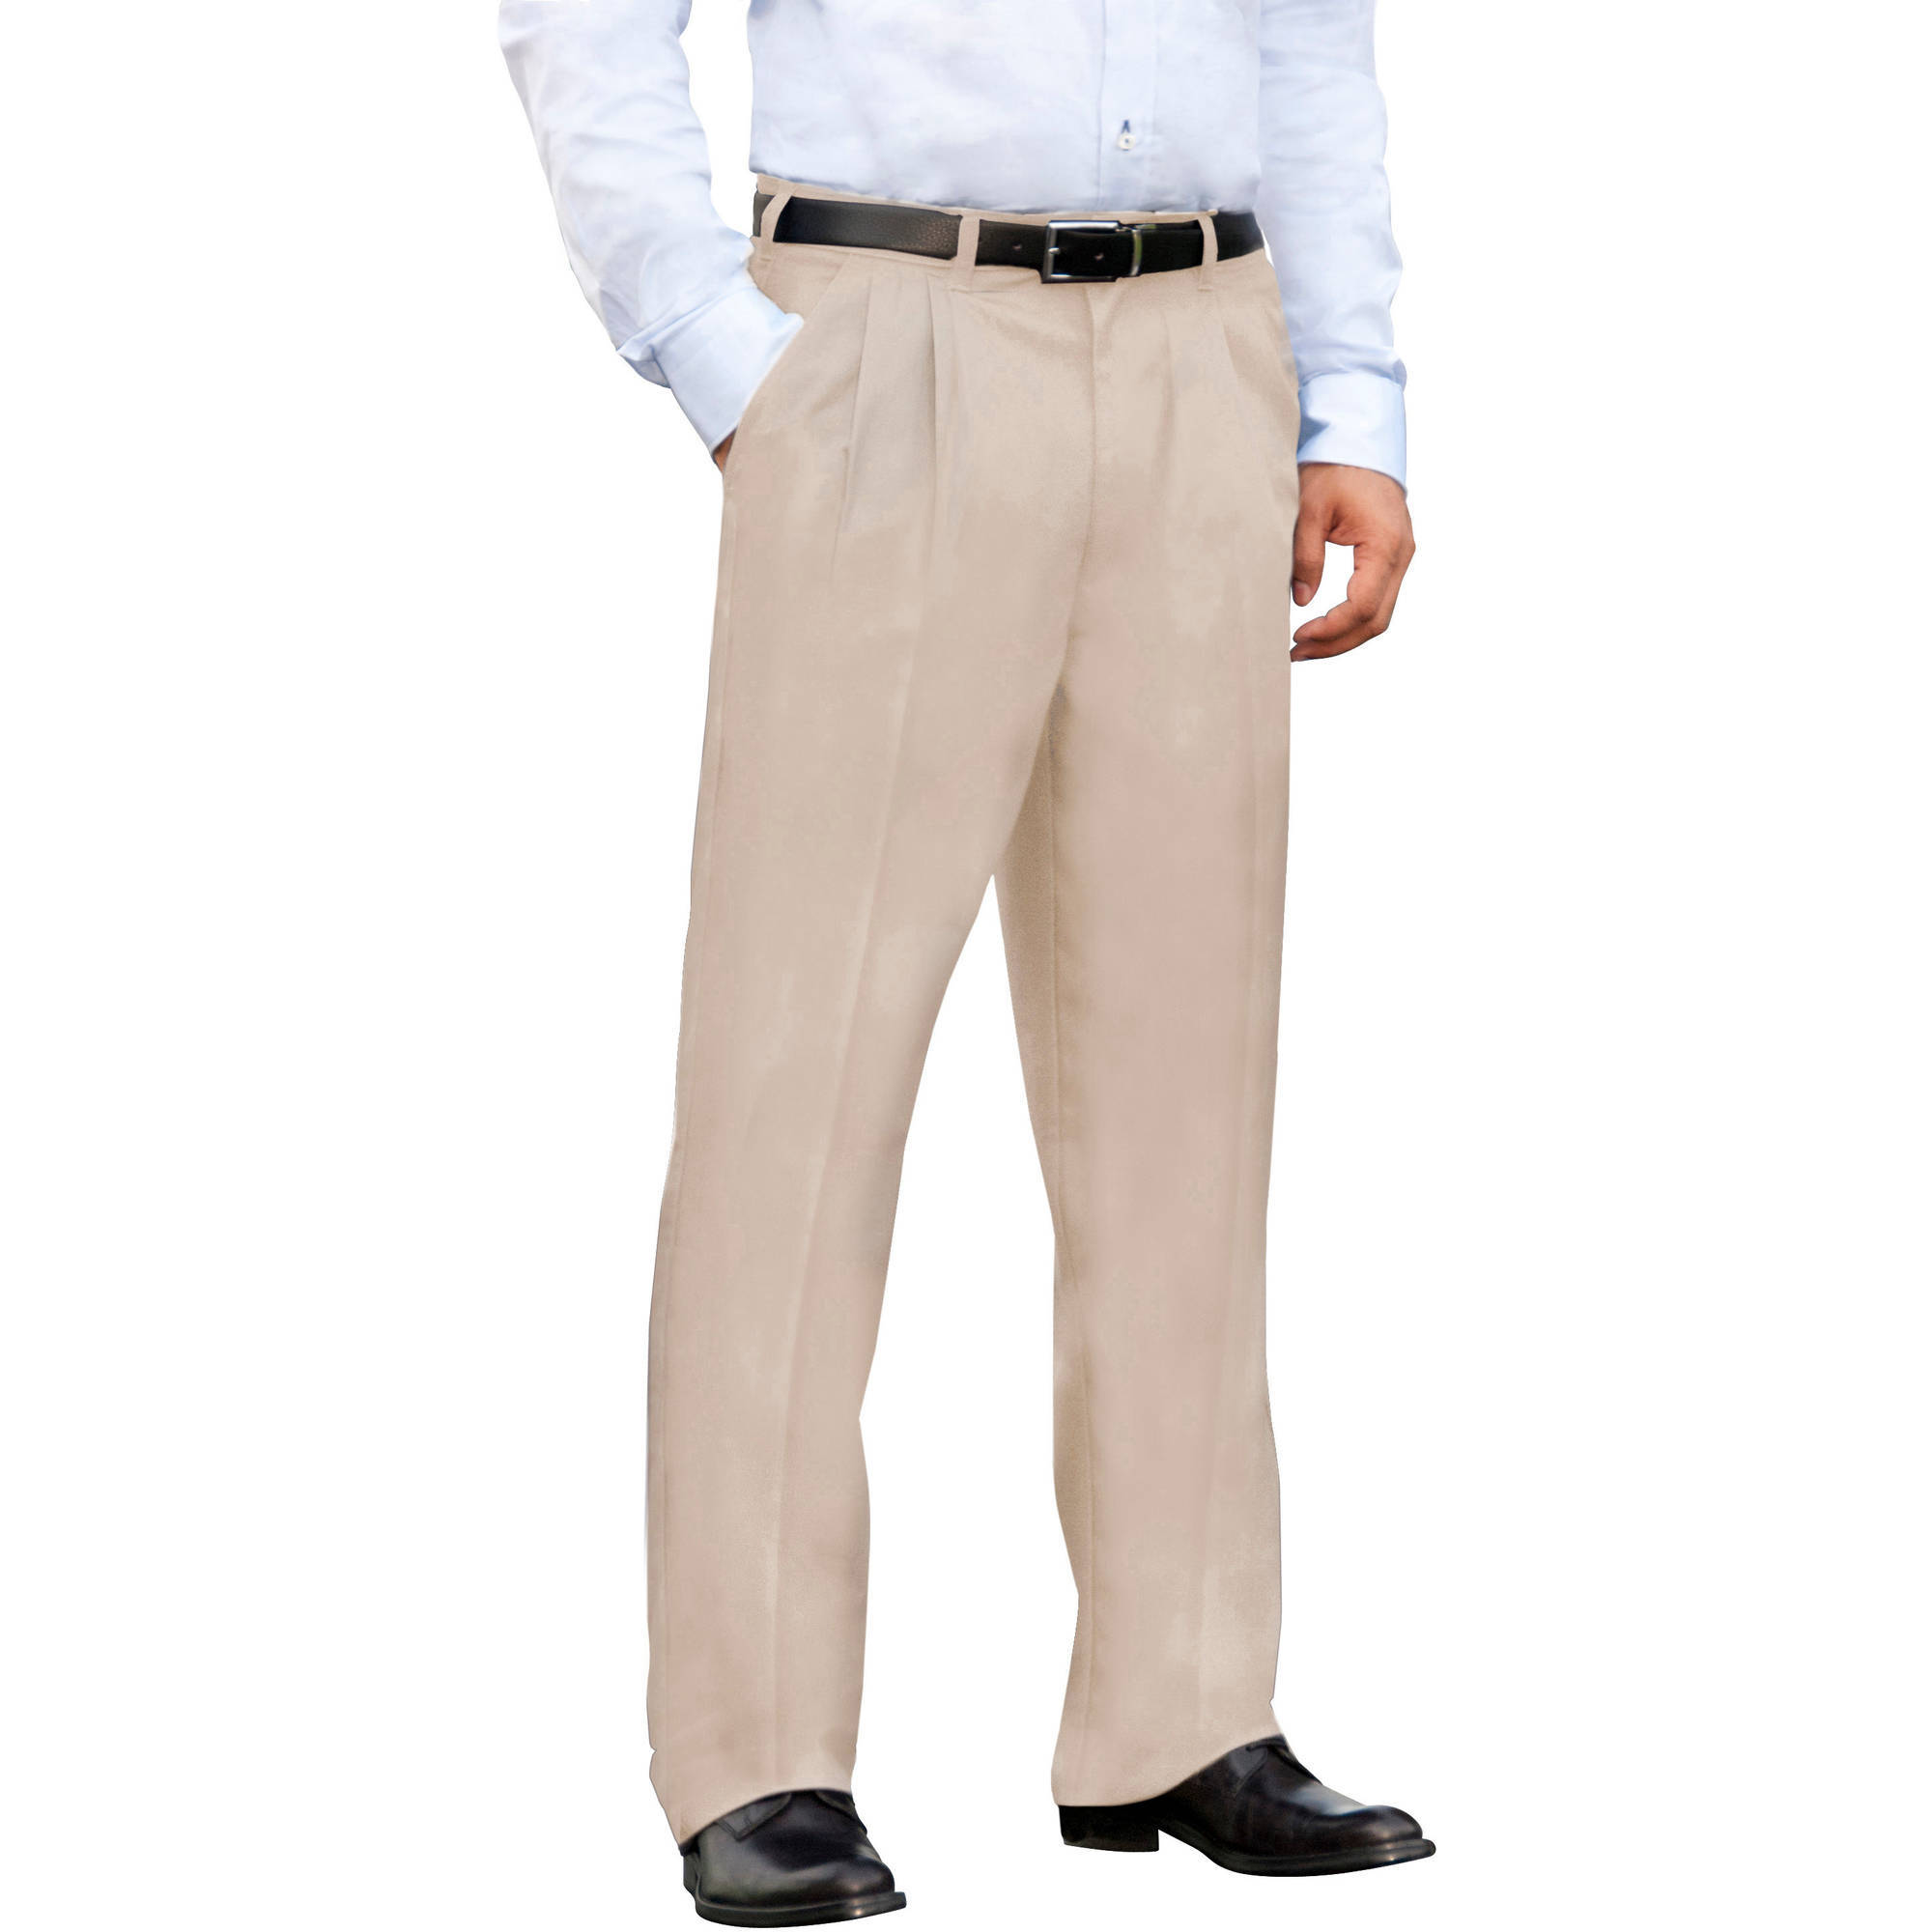 Big Men's Pleated Front Wrinkle Resistant Pants - image 1 of 2